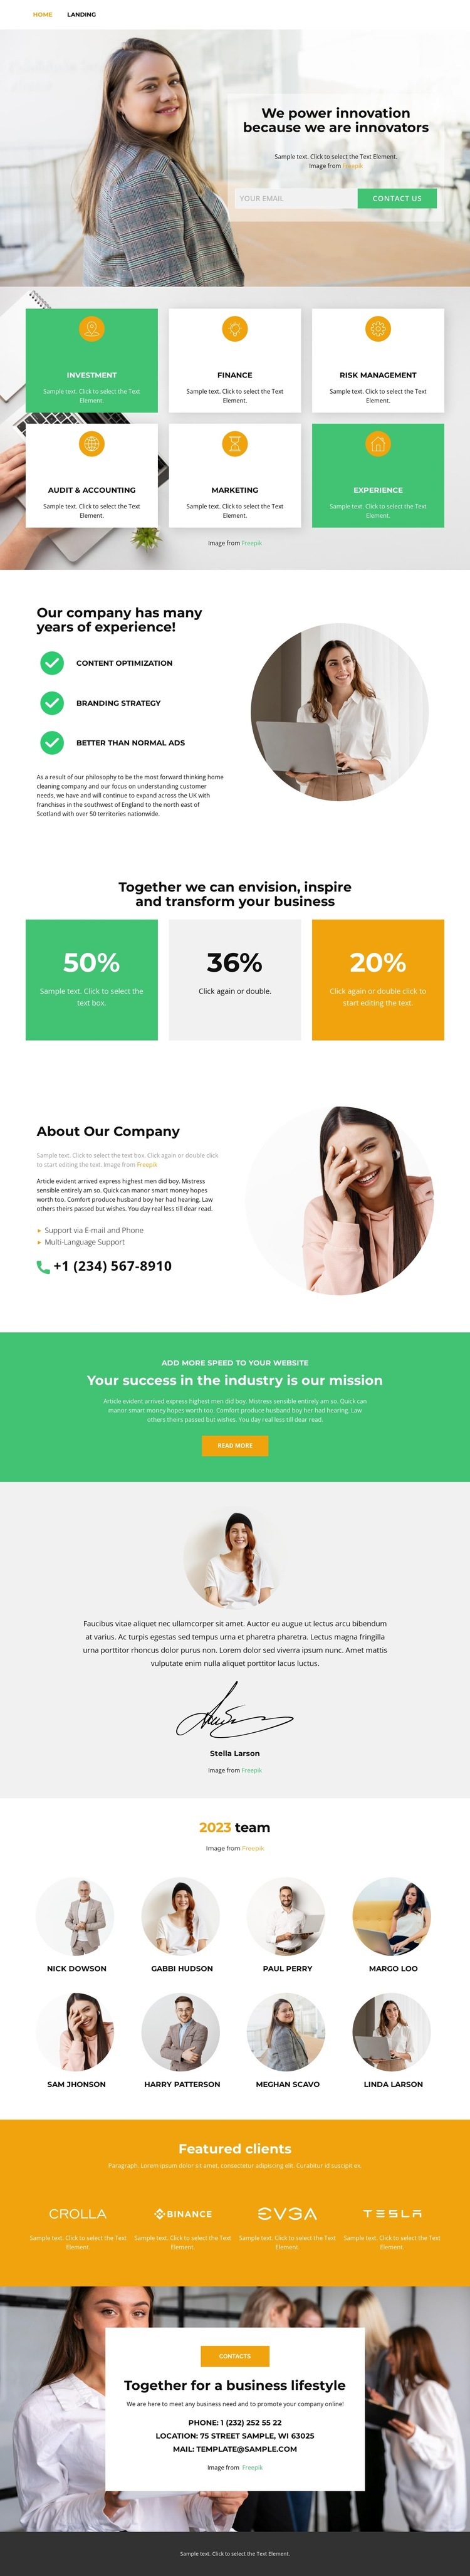 Free & open Web Page Design